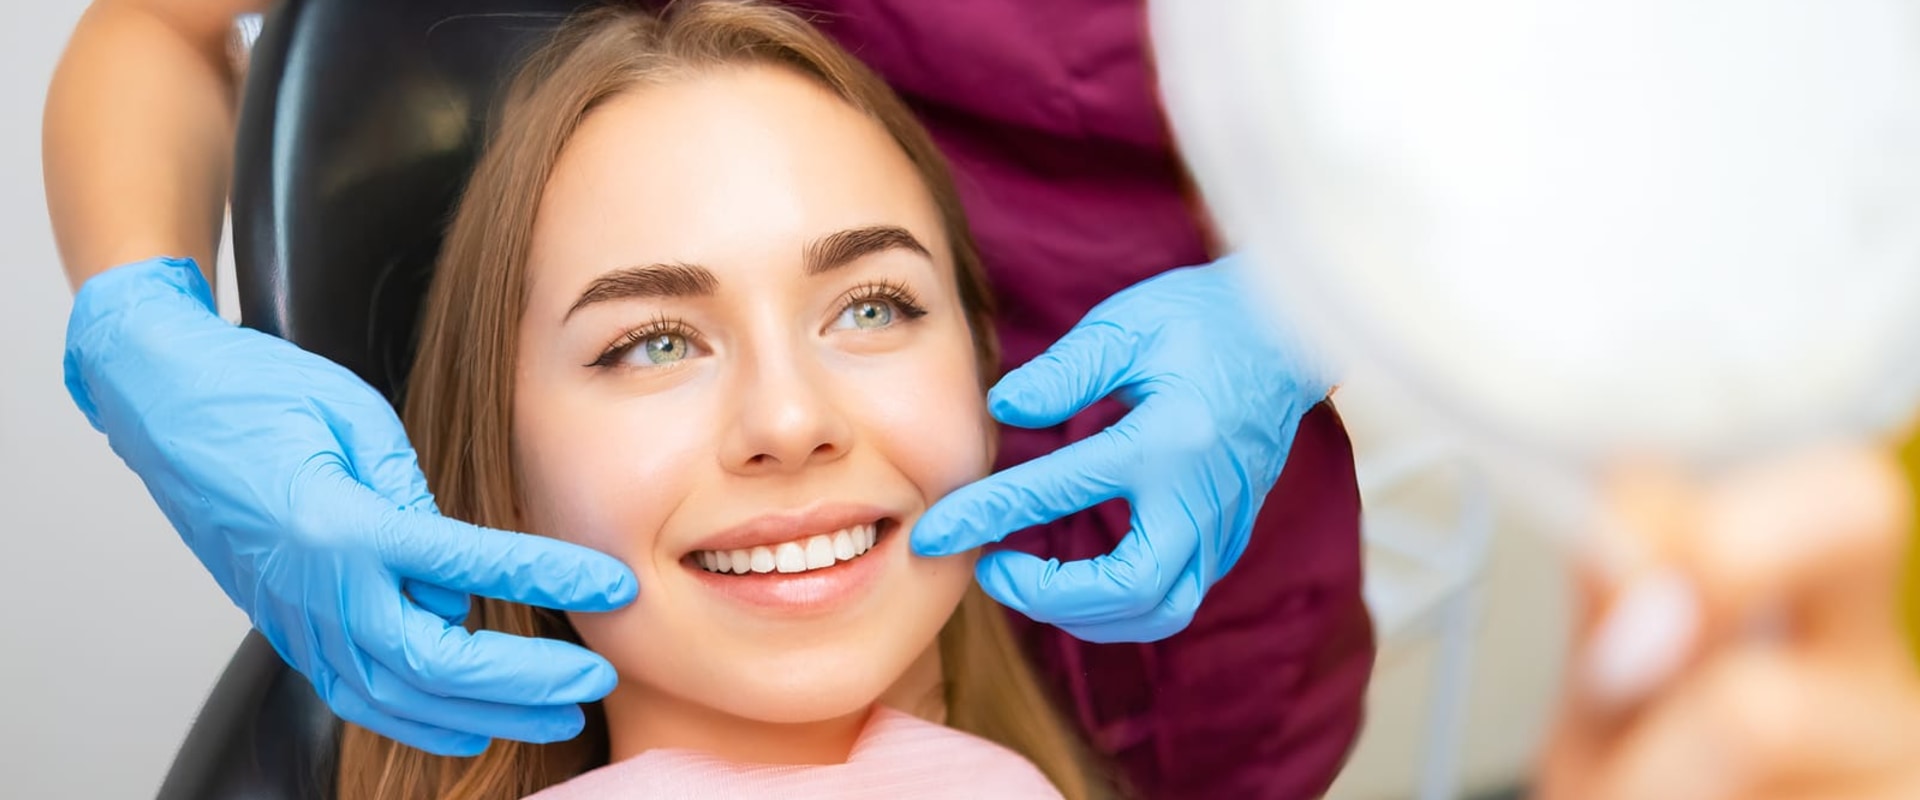 Getting The Perfect Smile Makeover: How Veneers For teeth whitening And Aesthetic Surgery Can Transform Your Appearance In Conroe